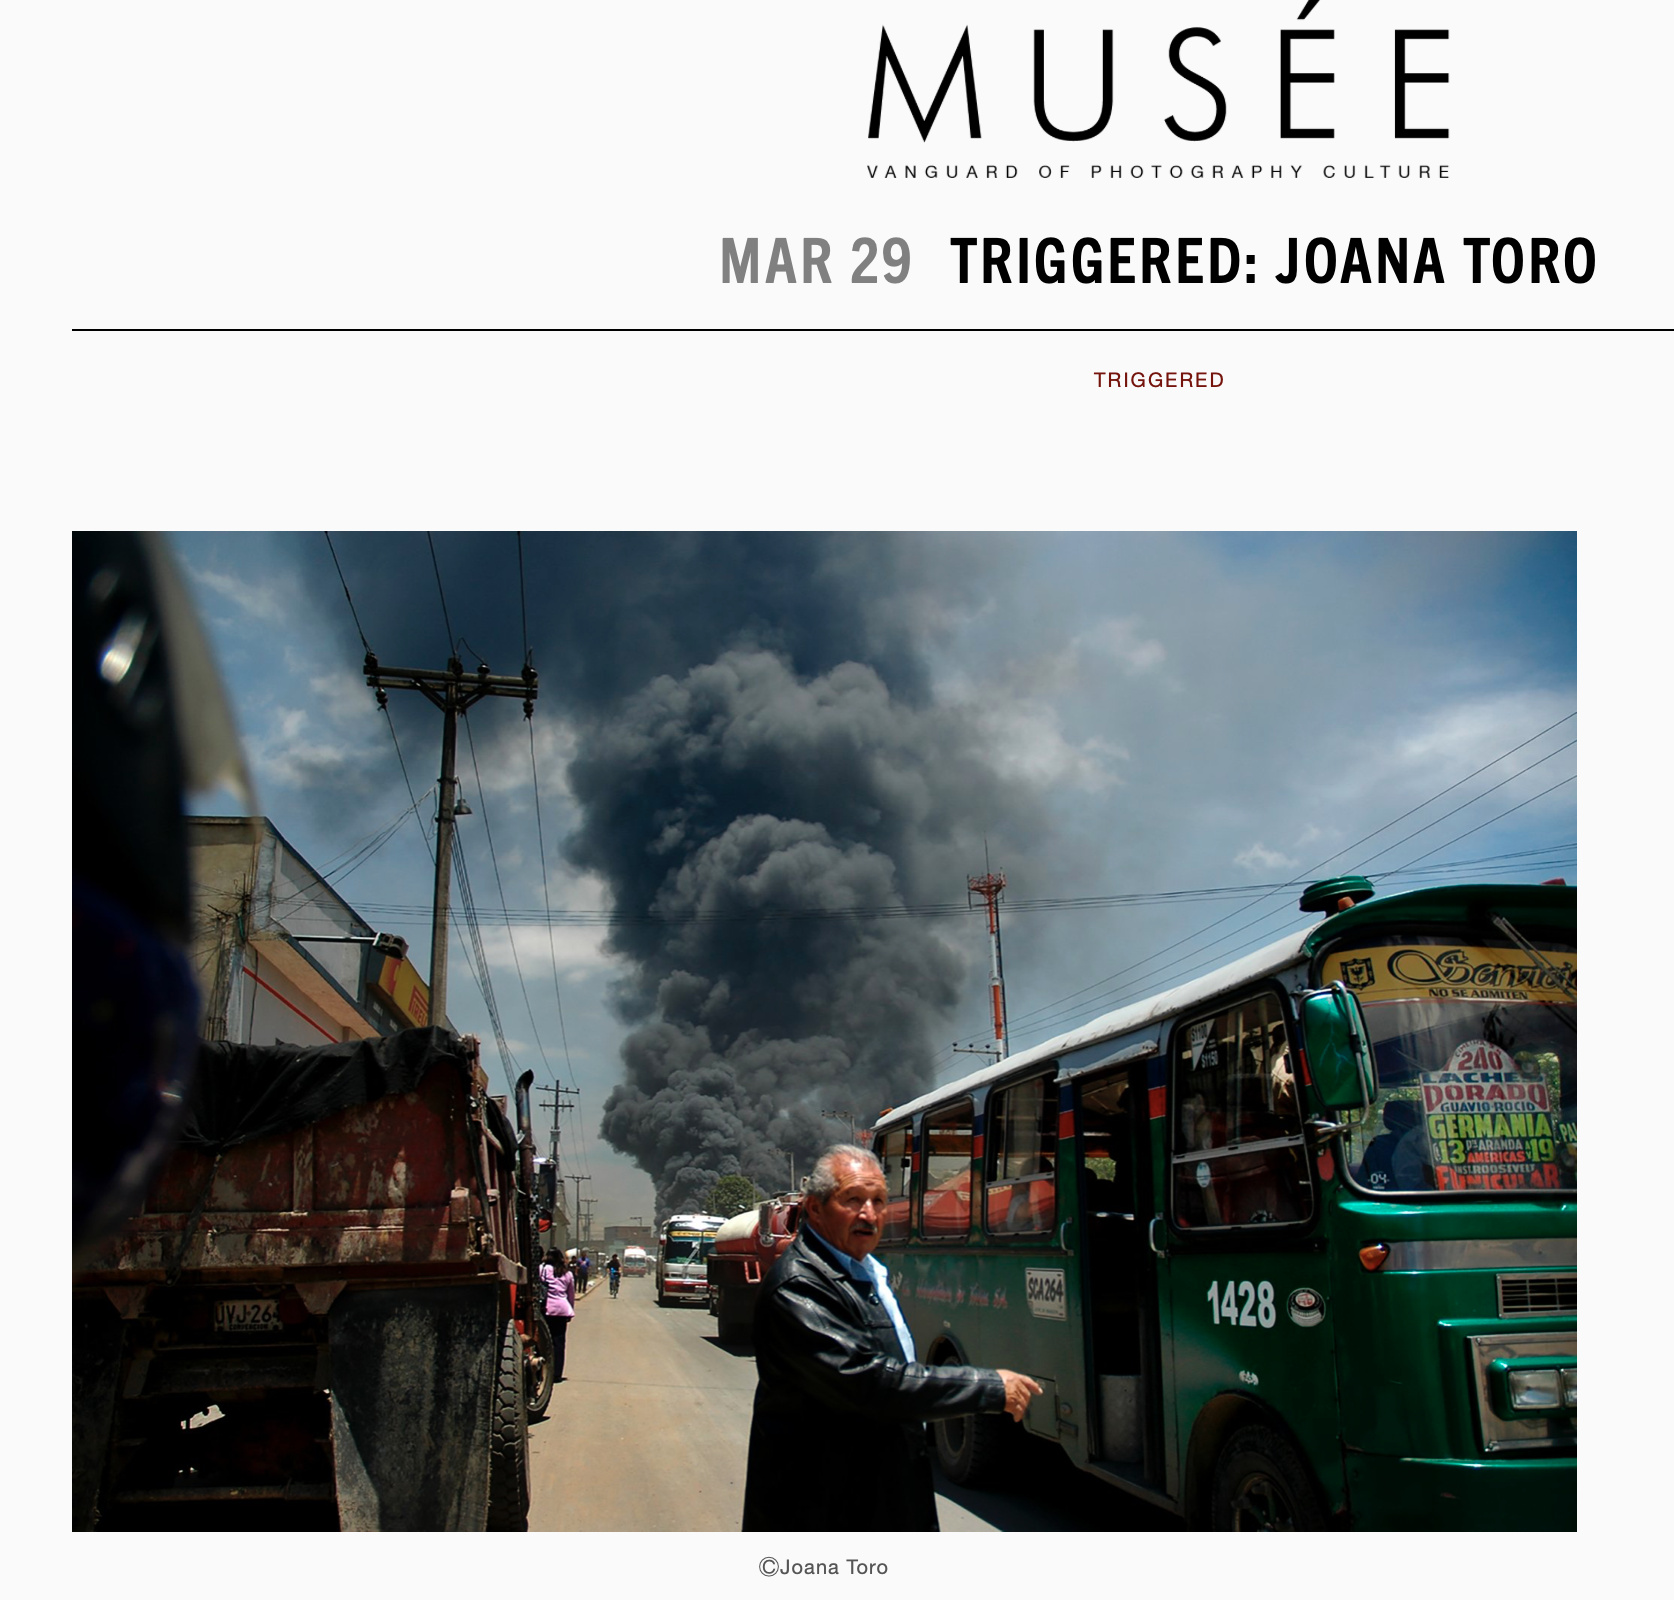 Thumbnail of Publication in Musse Magazine 